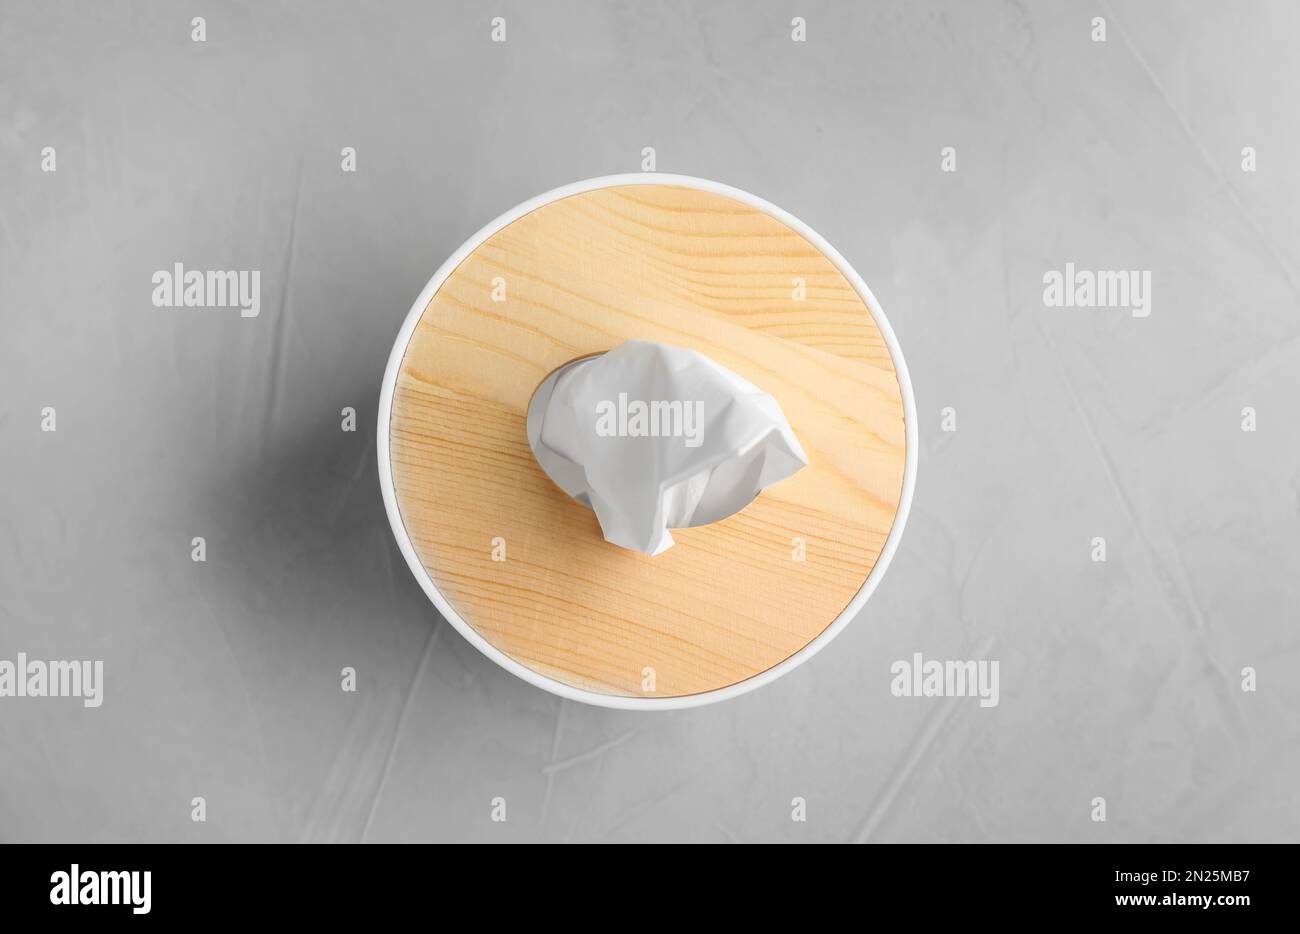 Wooden box of tissues on light table, top view Stock Photo